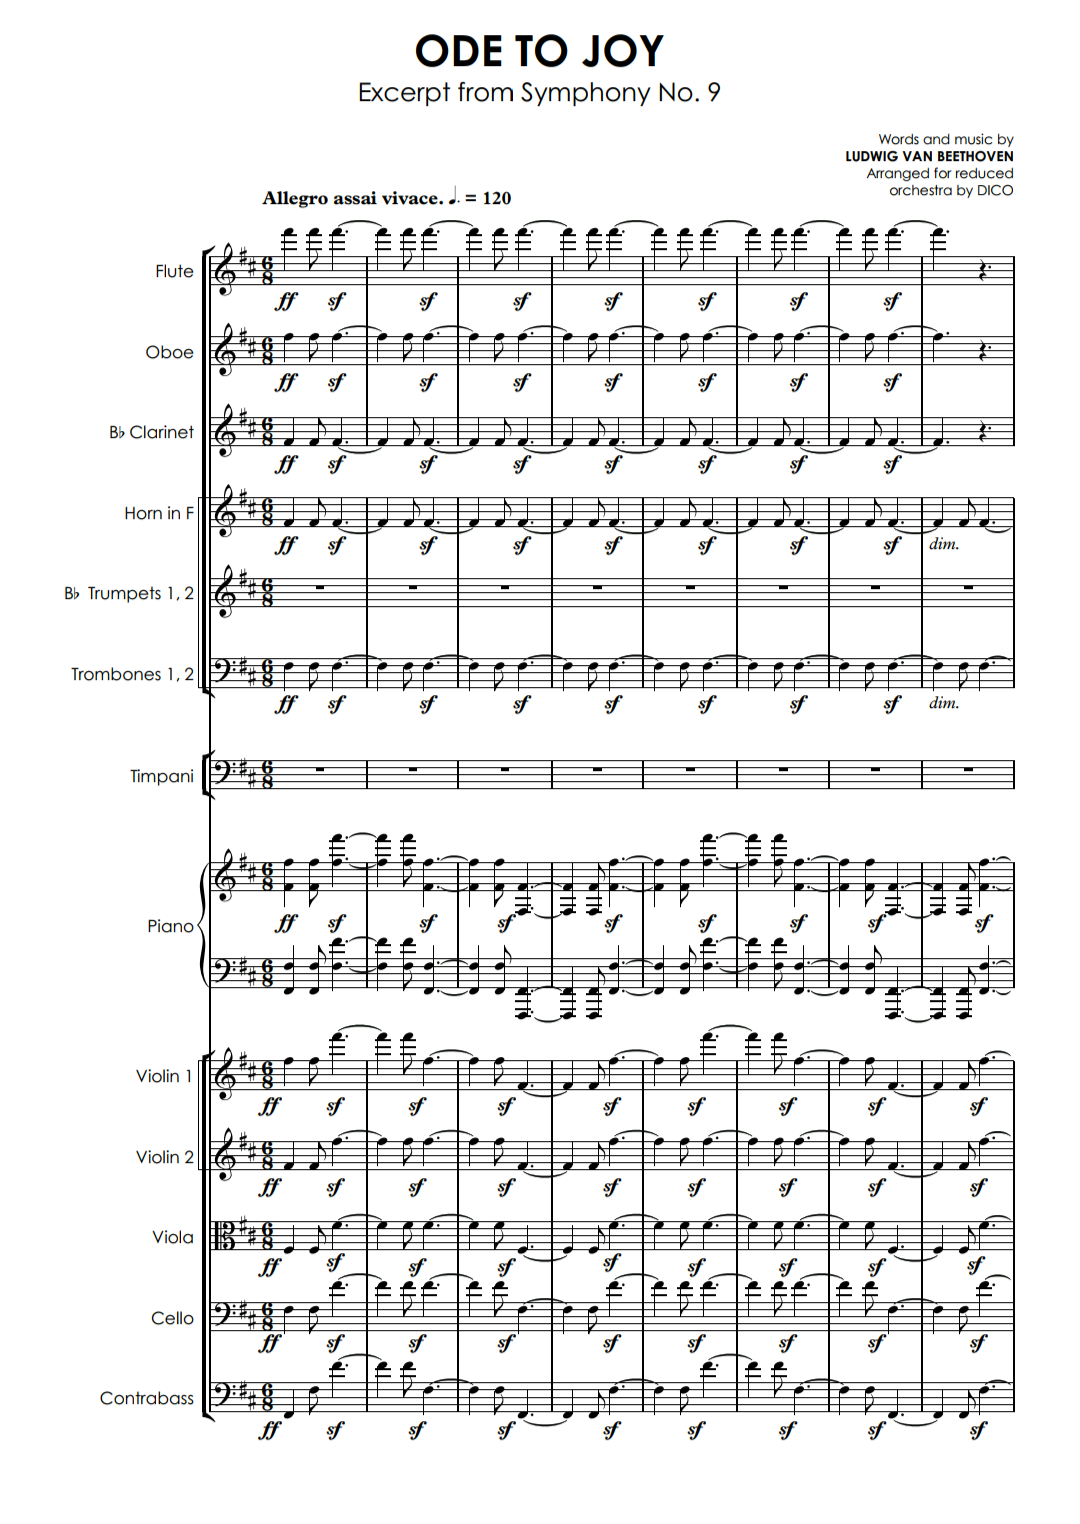 Ode to Joy orch pag 1